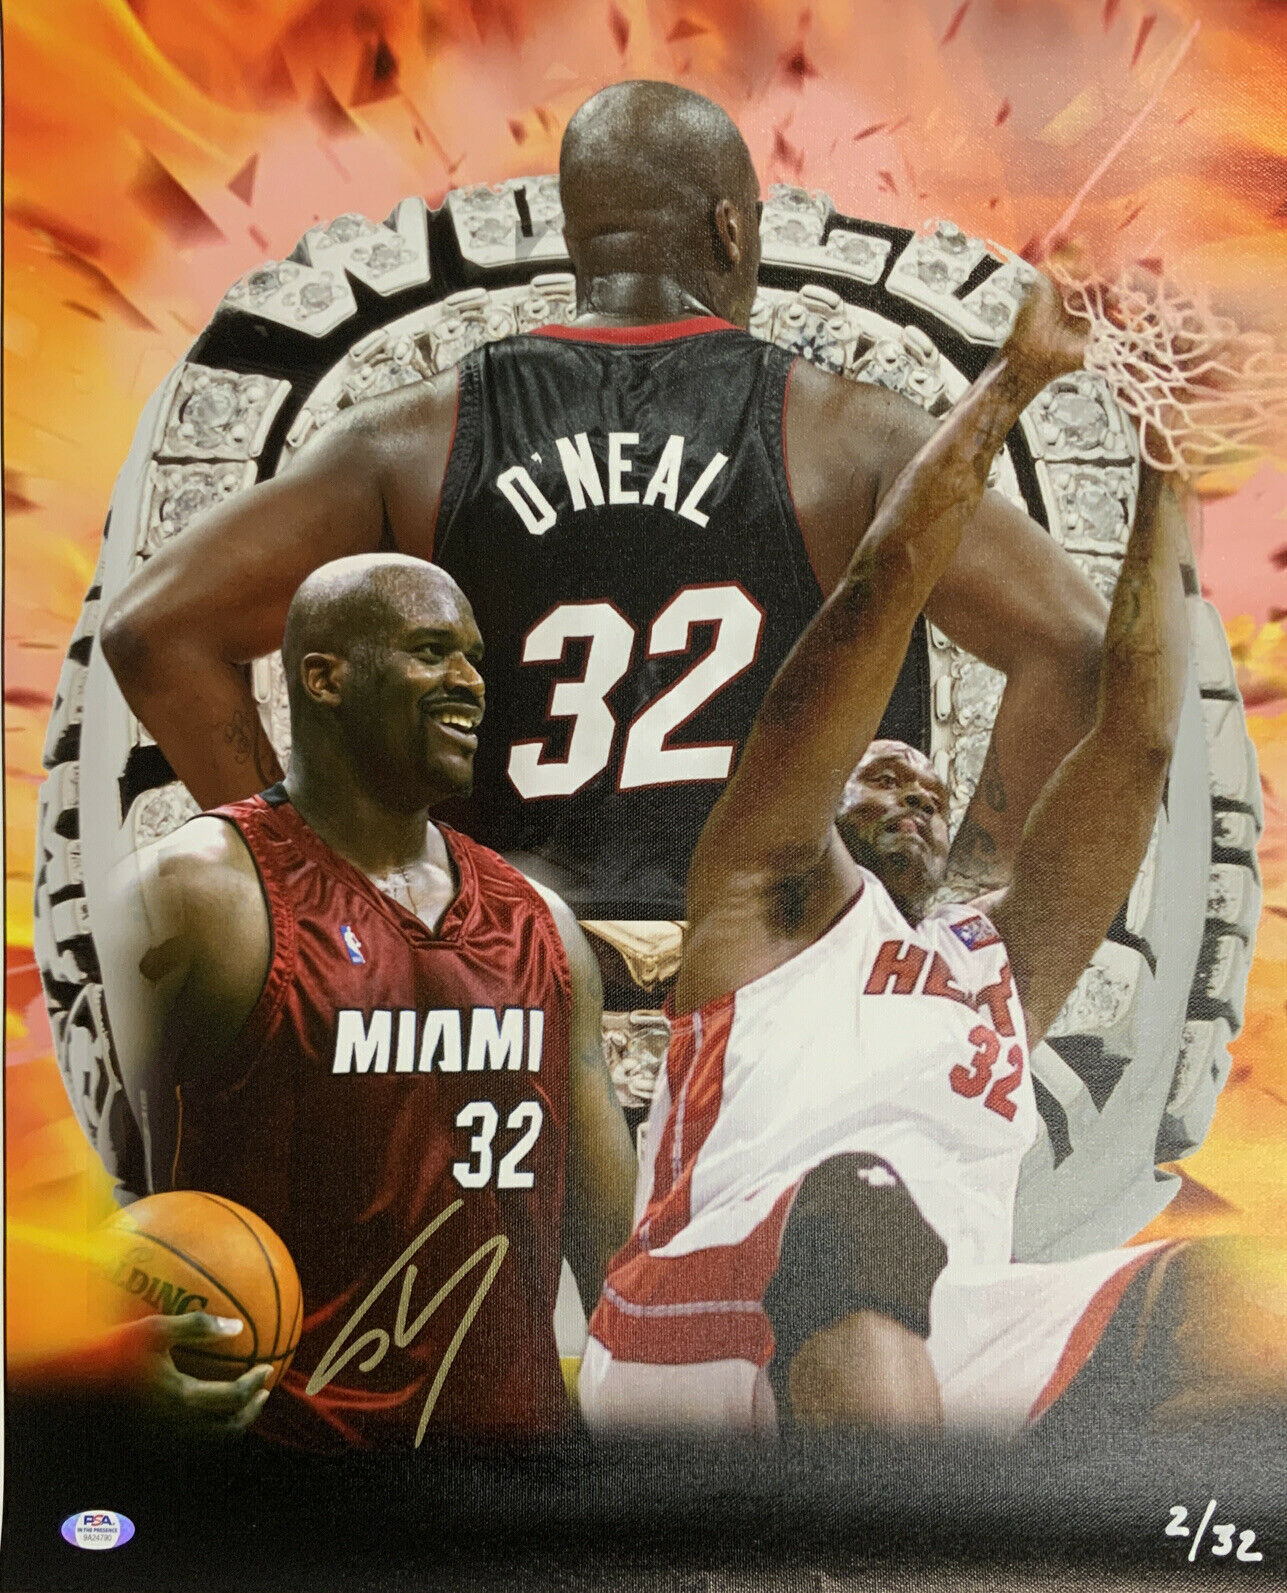 2/32 Shaquille O'neal Miami Heat Champ Signed 18x22 Le Canvas Print Psa 9a24790